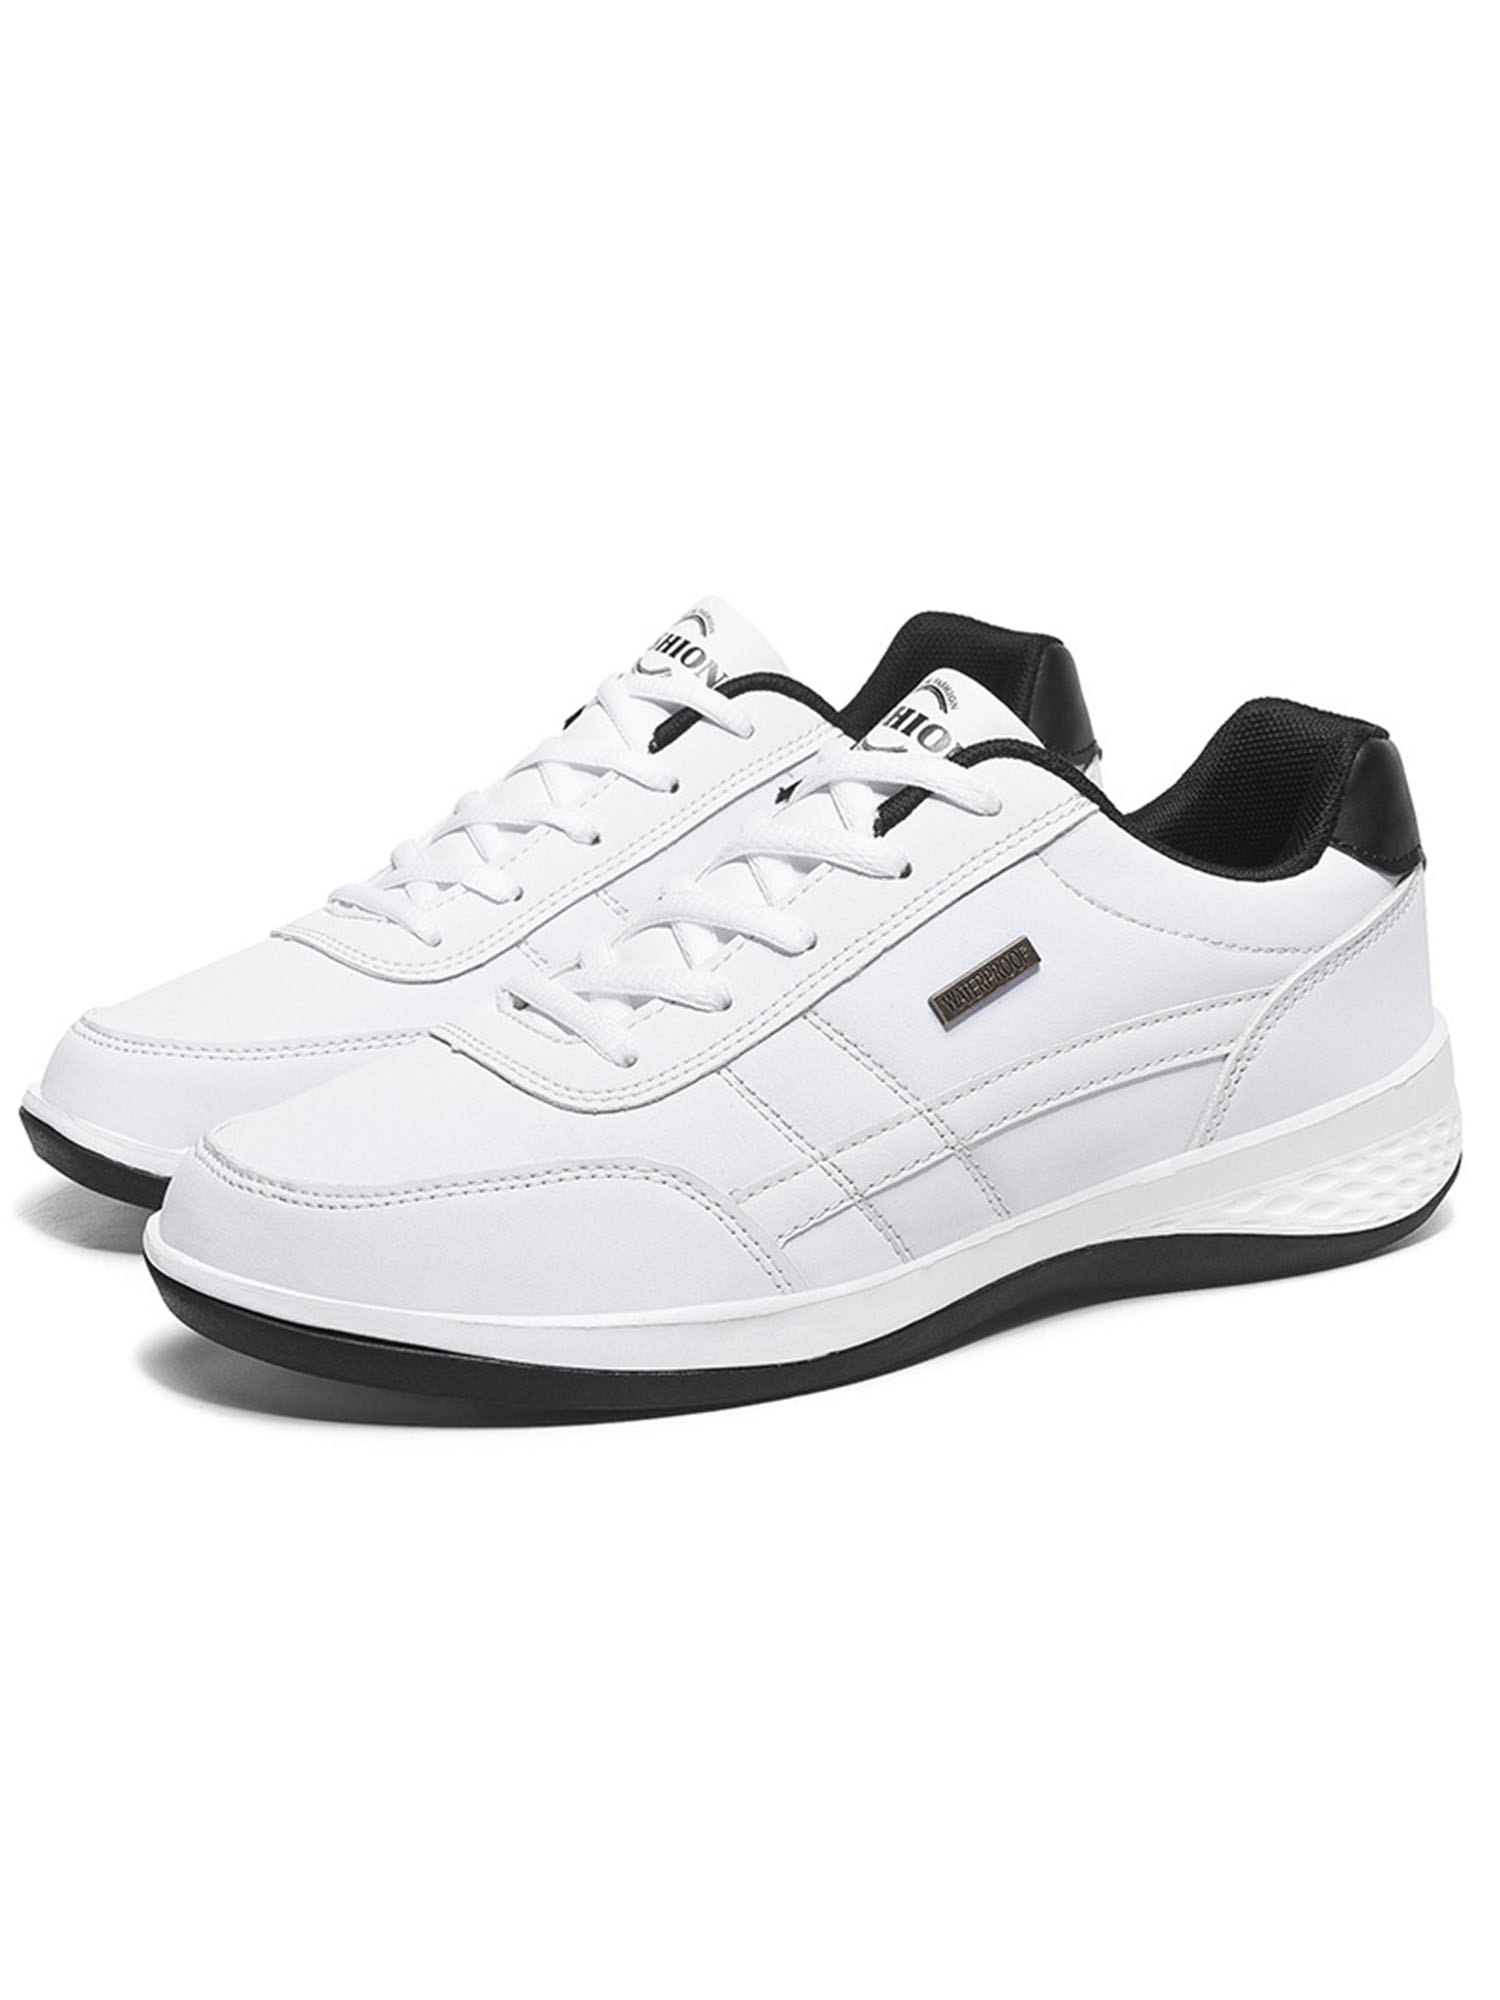 Avamo Casual Sneakers Men's Athletic Running Trainers Sports Tennis Fitness Shoes Gym White US 12 1 Pair - image 1 of 5